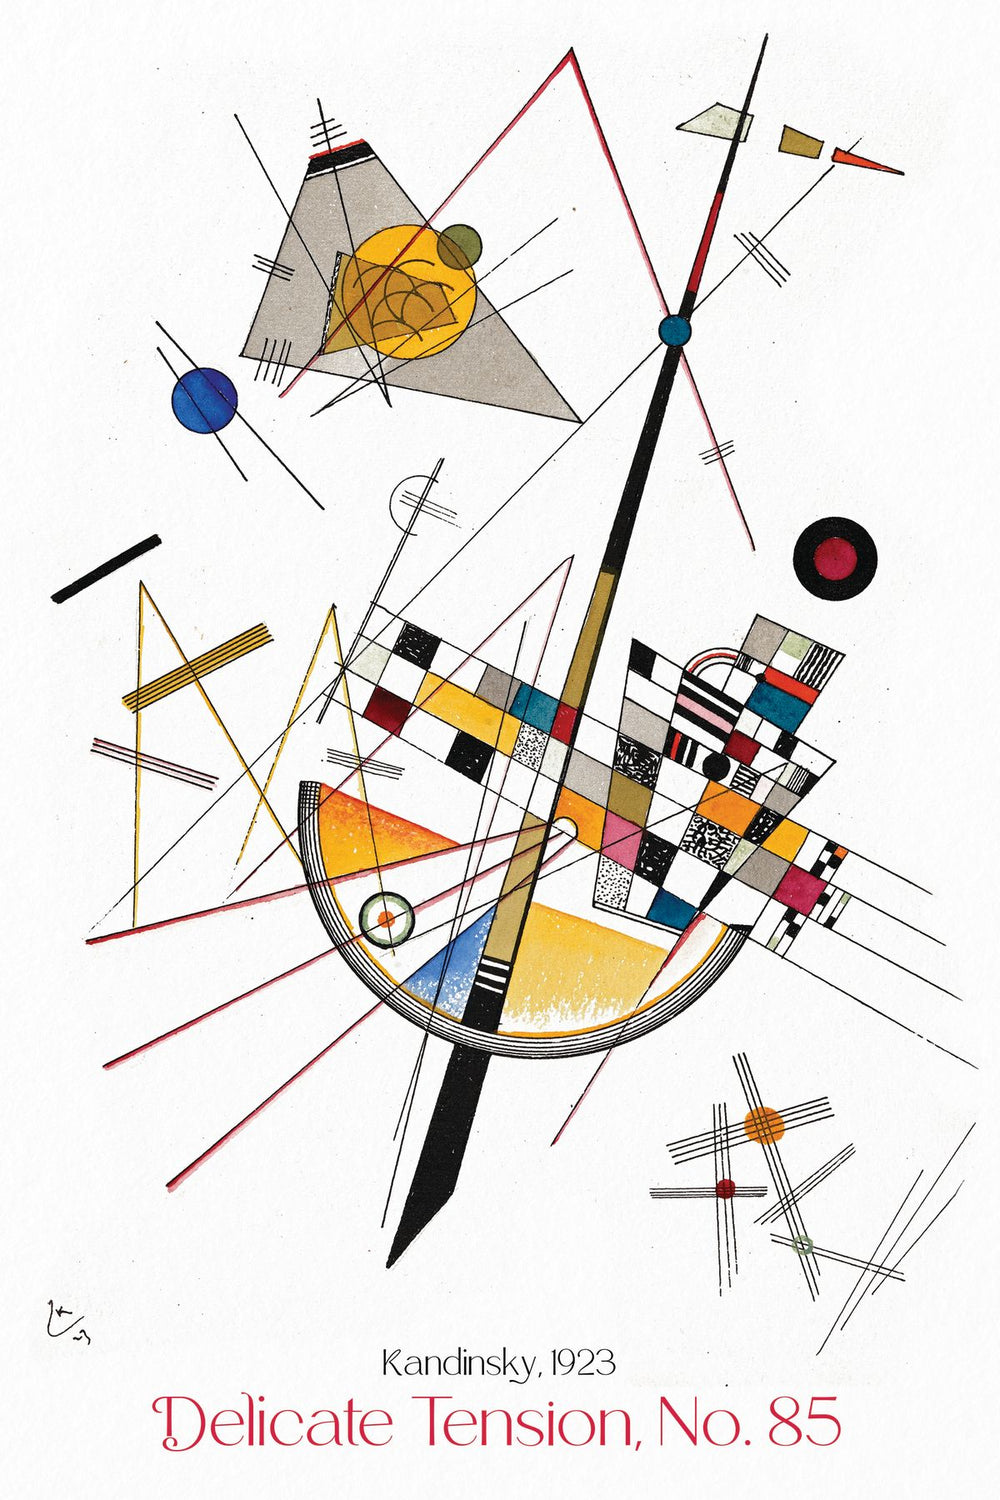 Delicate Tension 85 Kandinsky Exhibition Poster